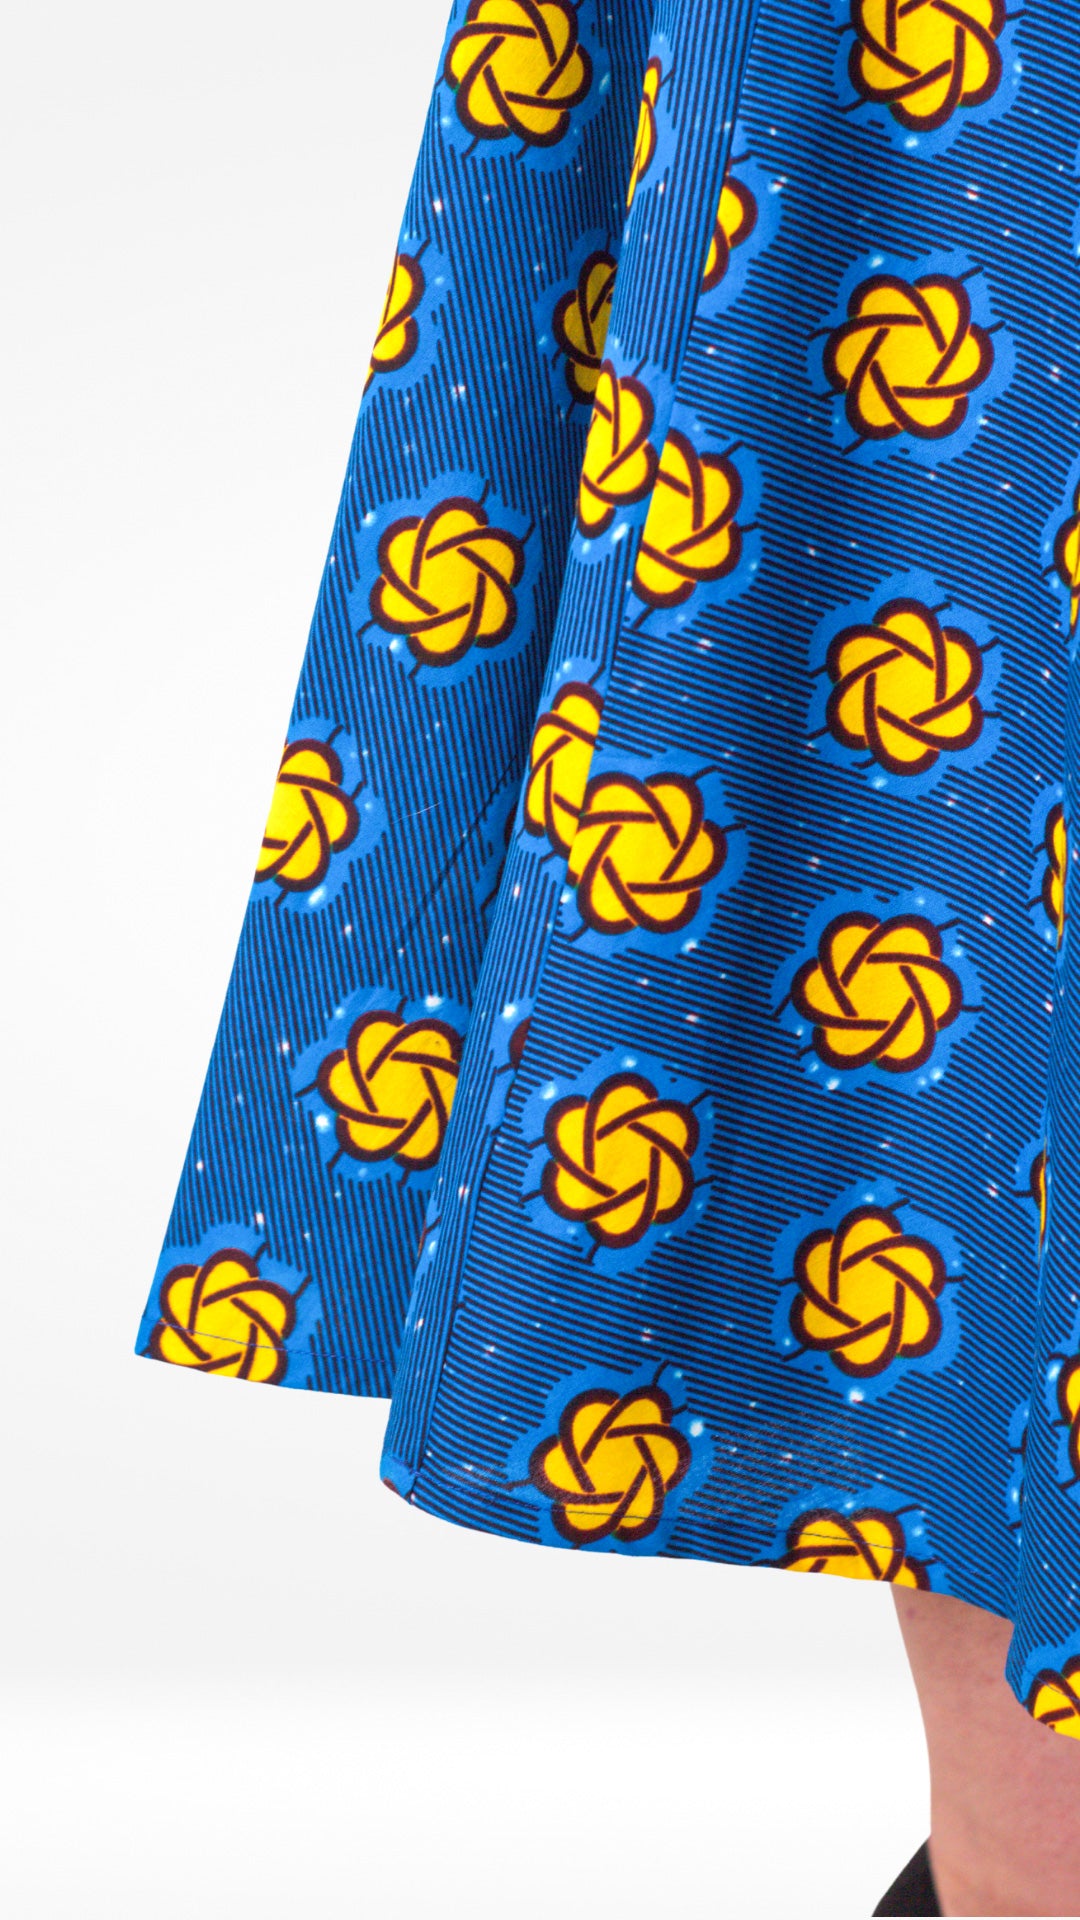 A close-up, highlighting the blue fabric and yellow design details of the bottom of the dress gracefully.